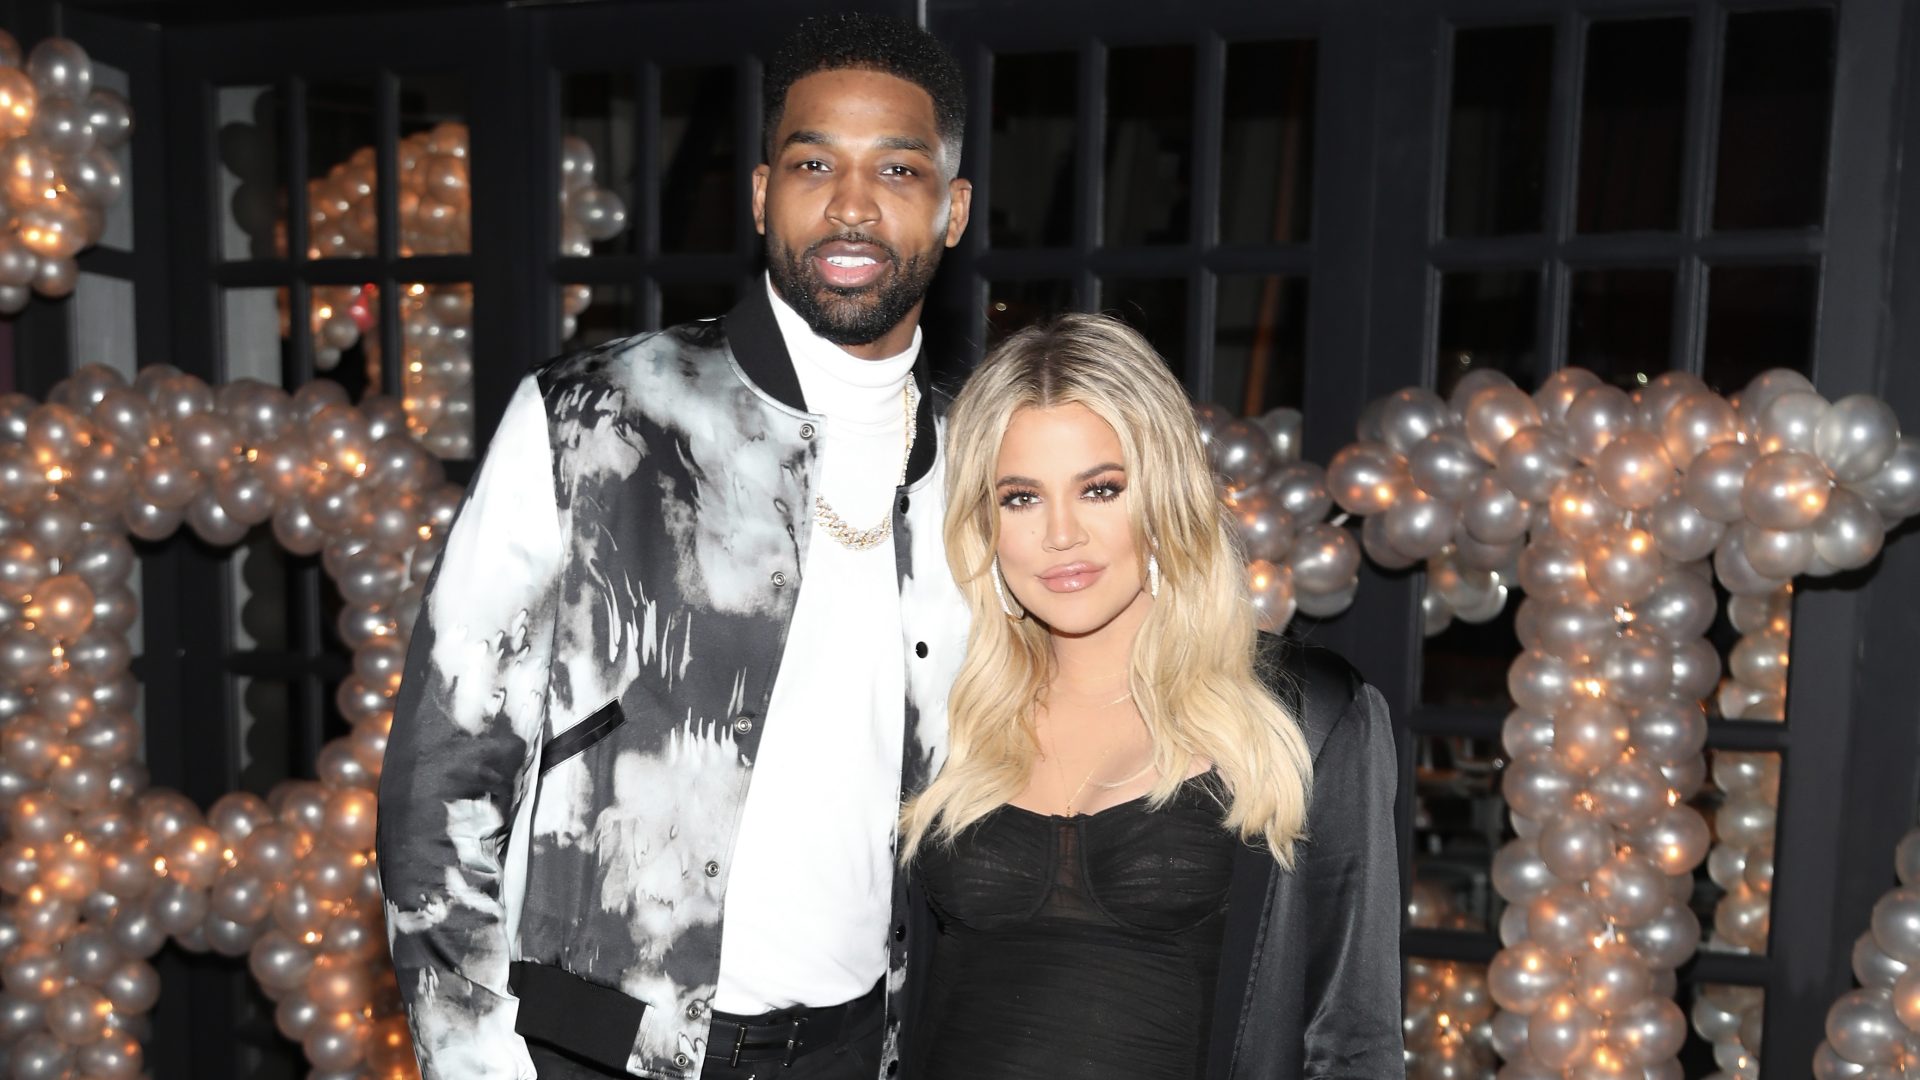 Khloé Kardashian Is ‘Not Getting Again With’ Tristan Thompson